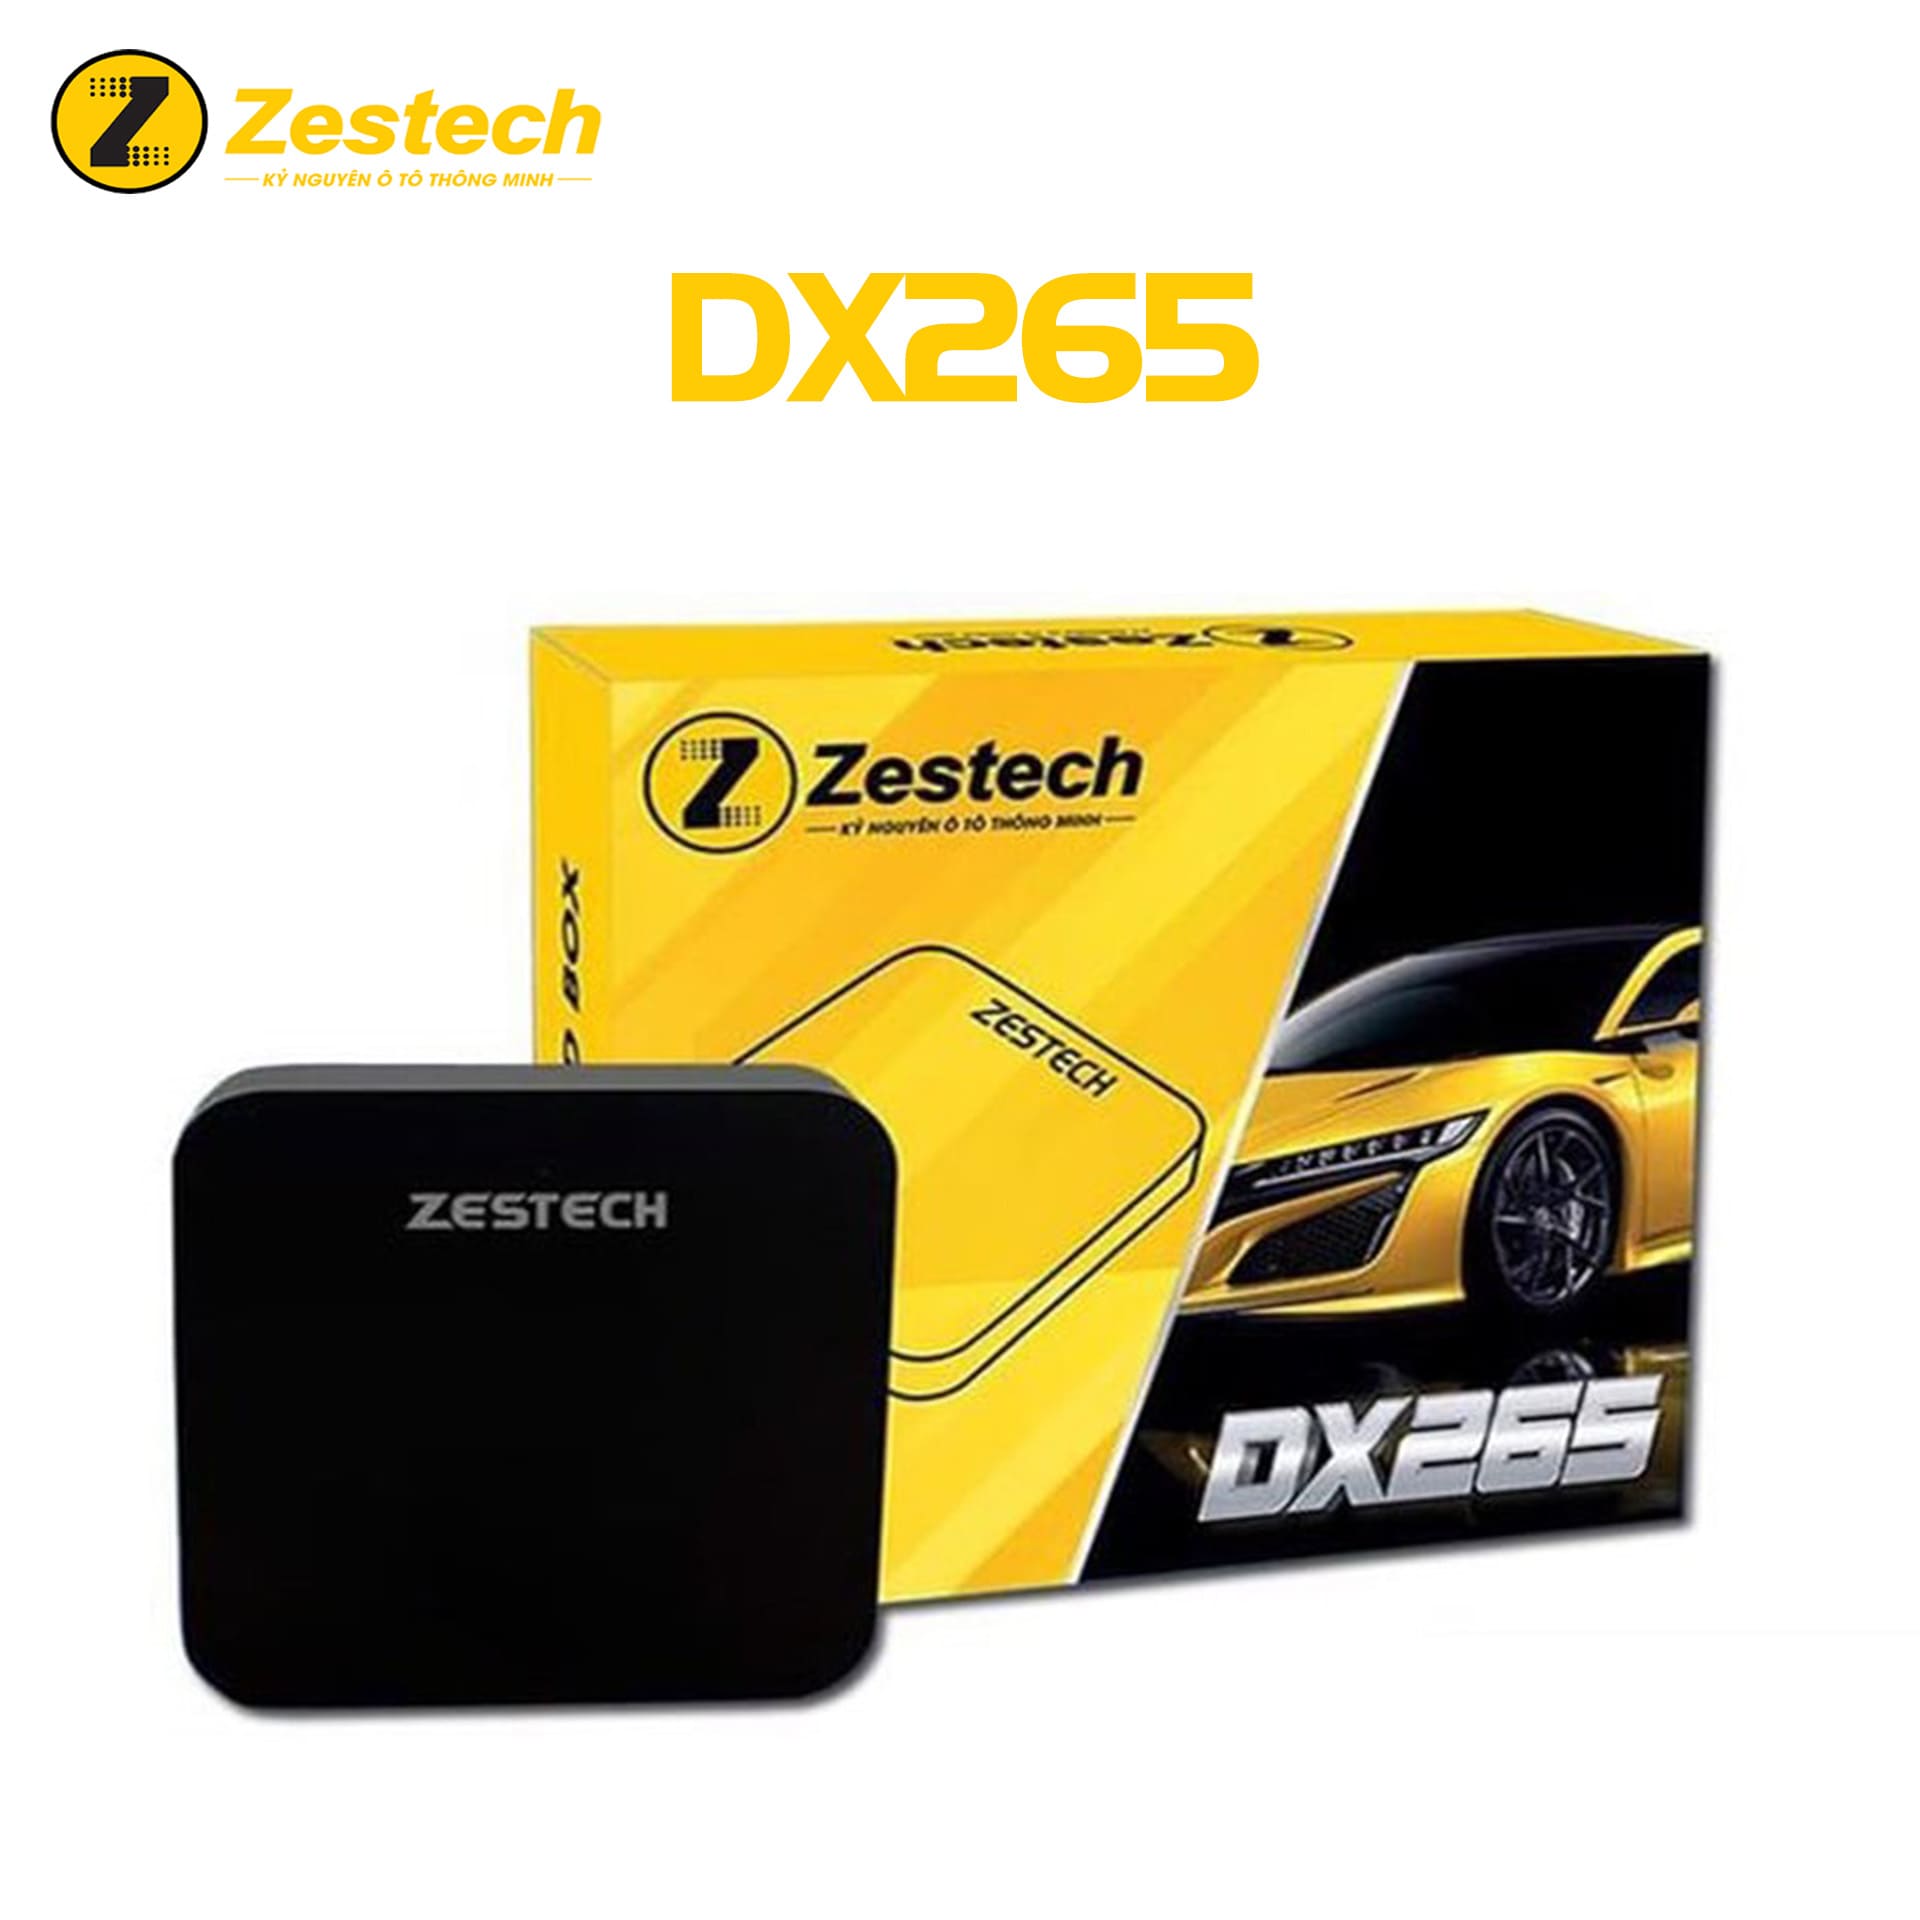 ANDROID BOX ZESTECH DX265